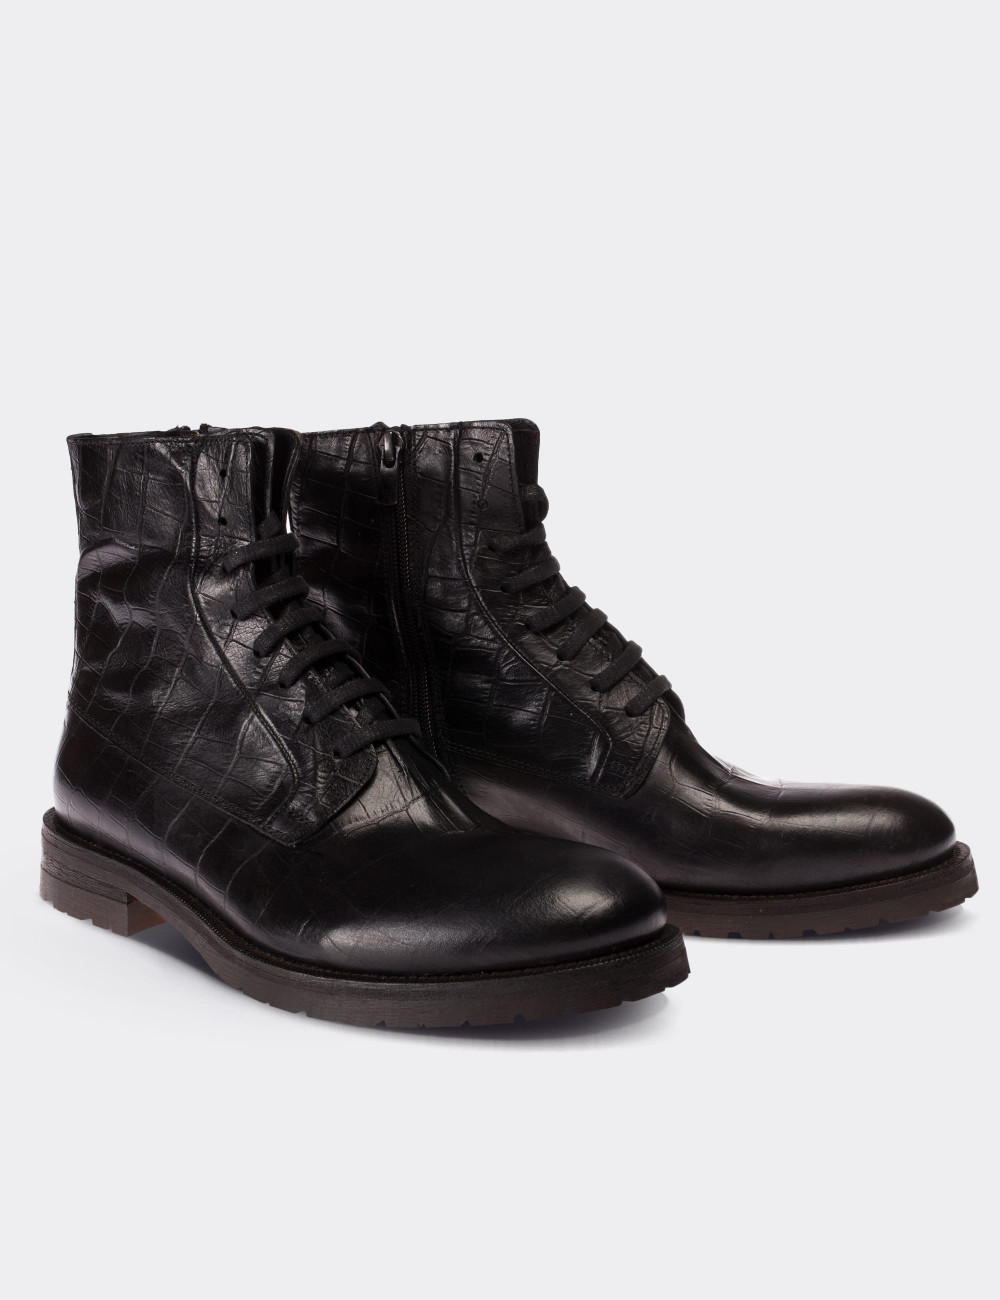 Black  Leather Boots - 01324MSYHC02